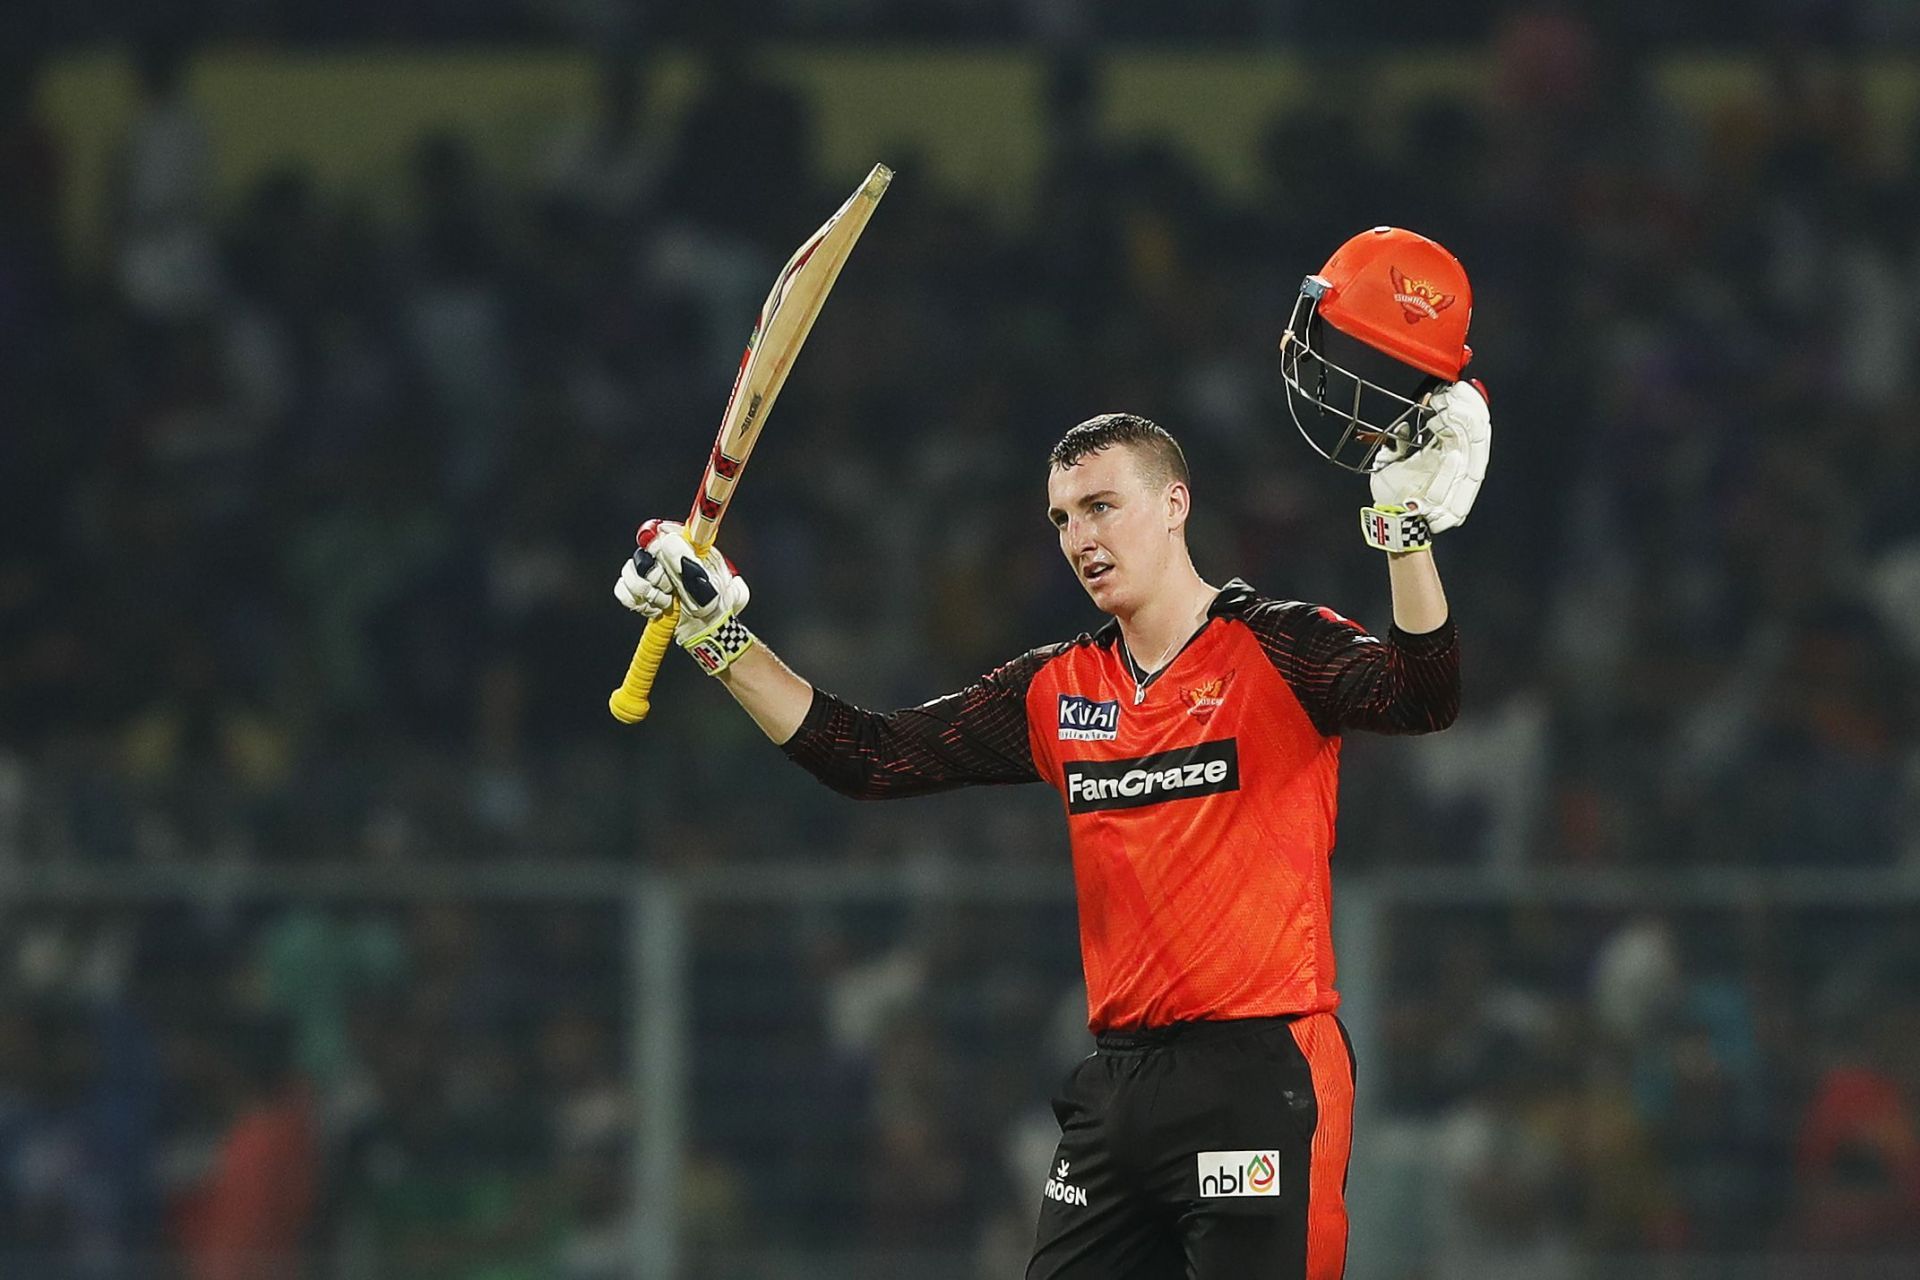 Harry Brook was in splendid form in this match [Image: IPL]